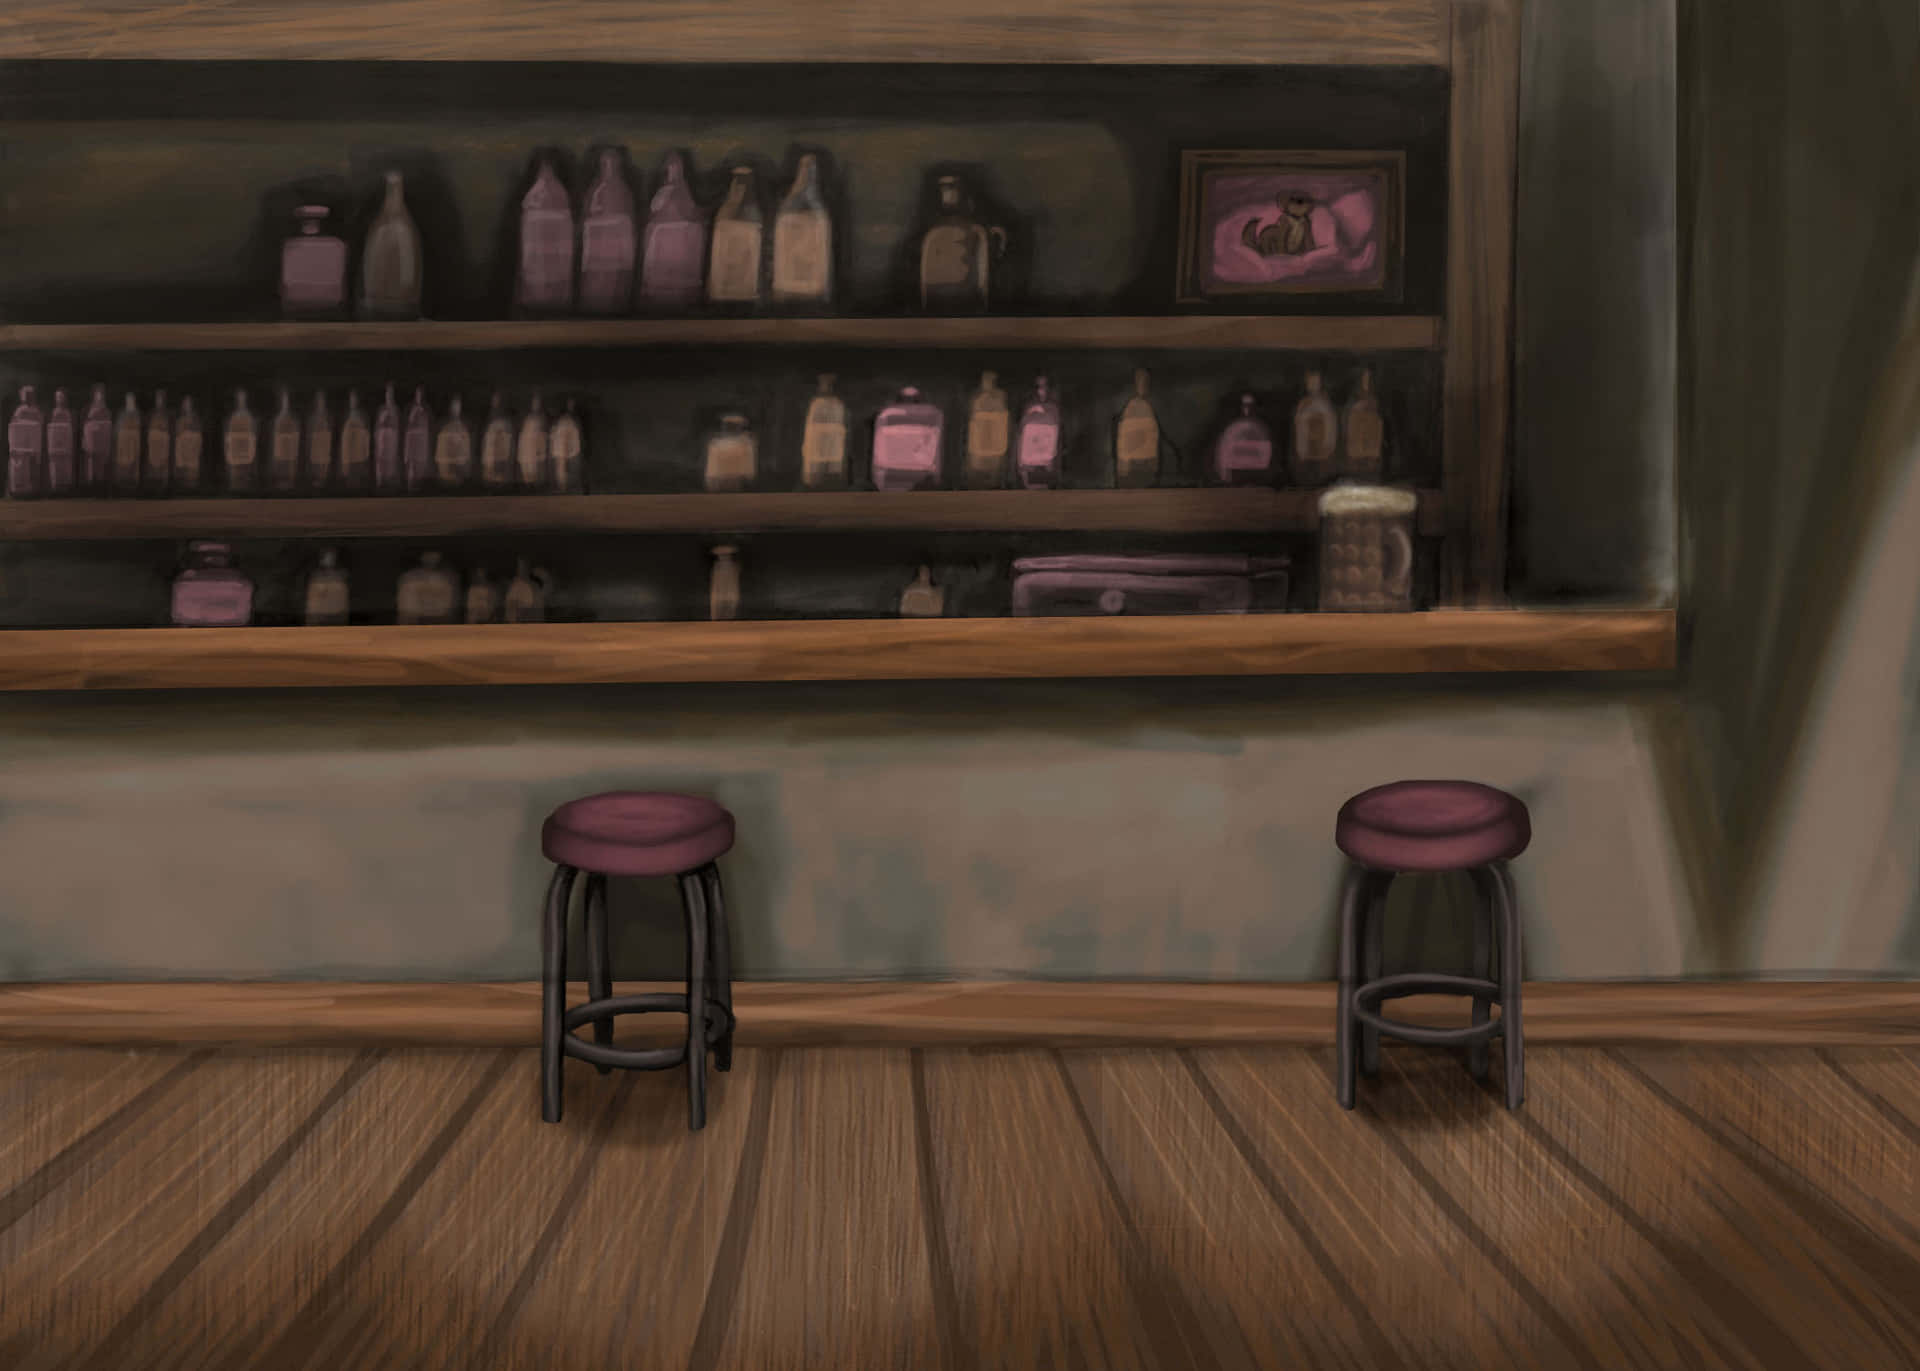 Step into a cozy, rustic atmosphere perfect for socializing or dining - Tavern!